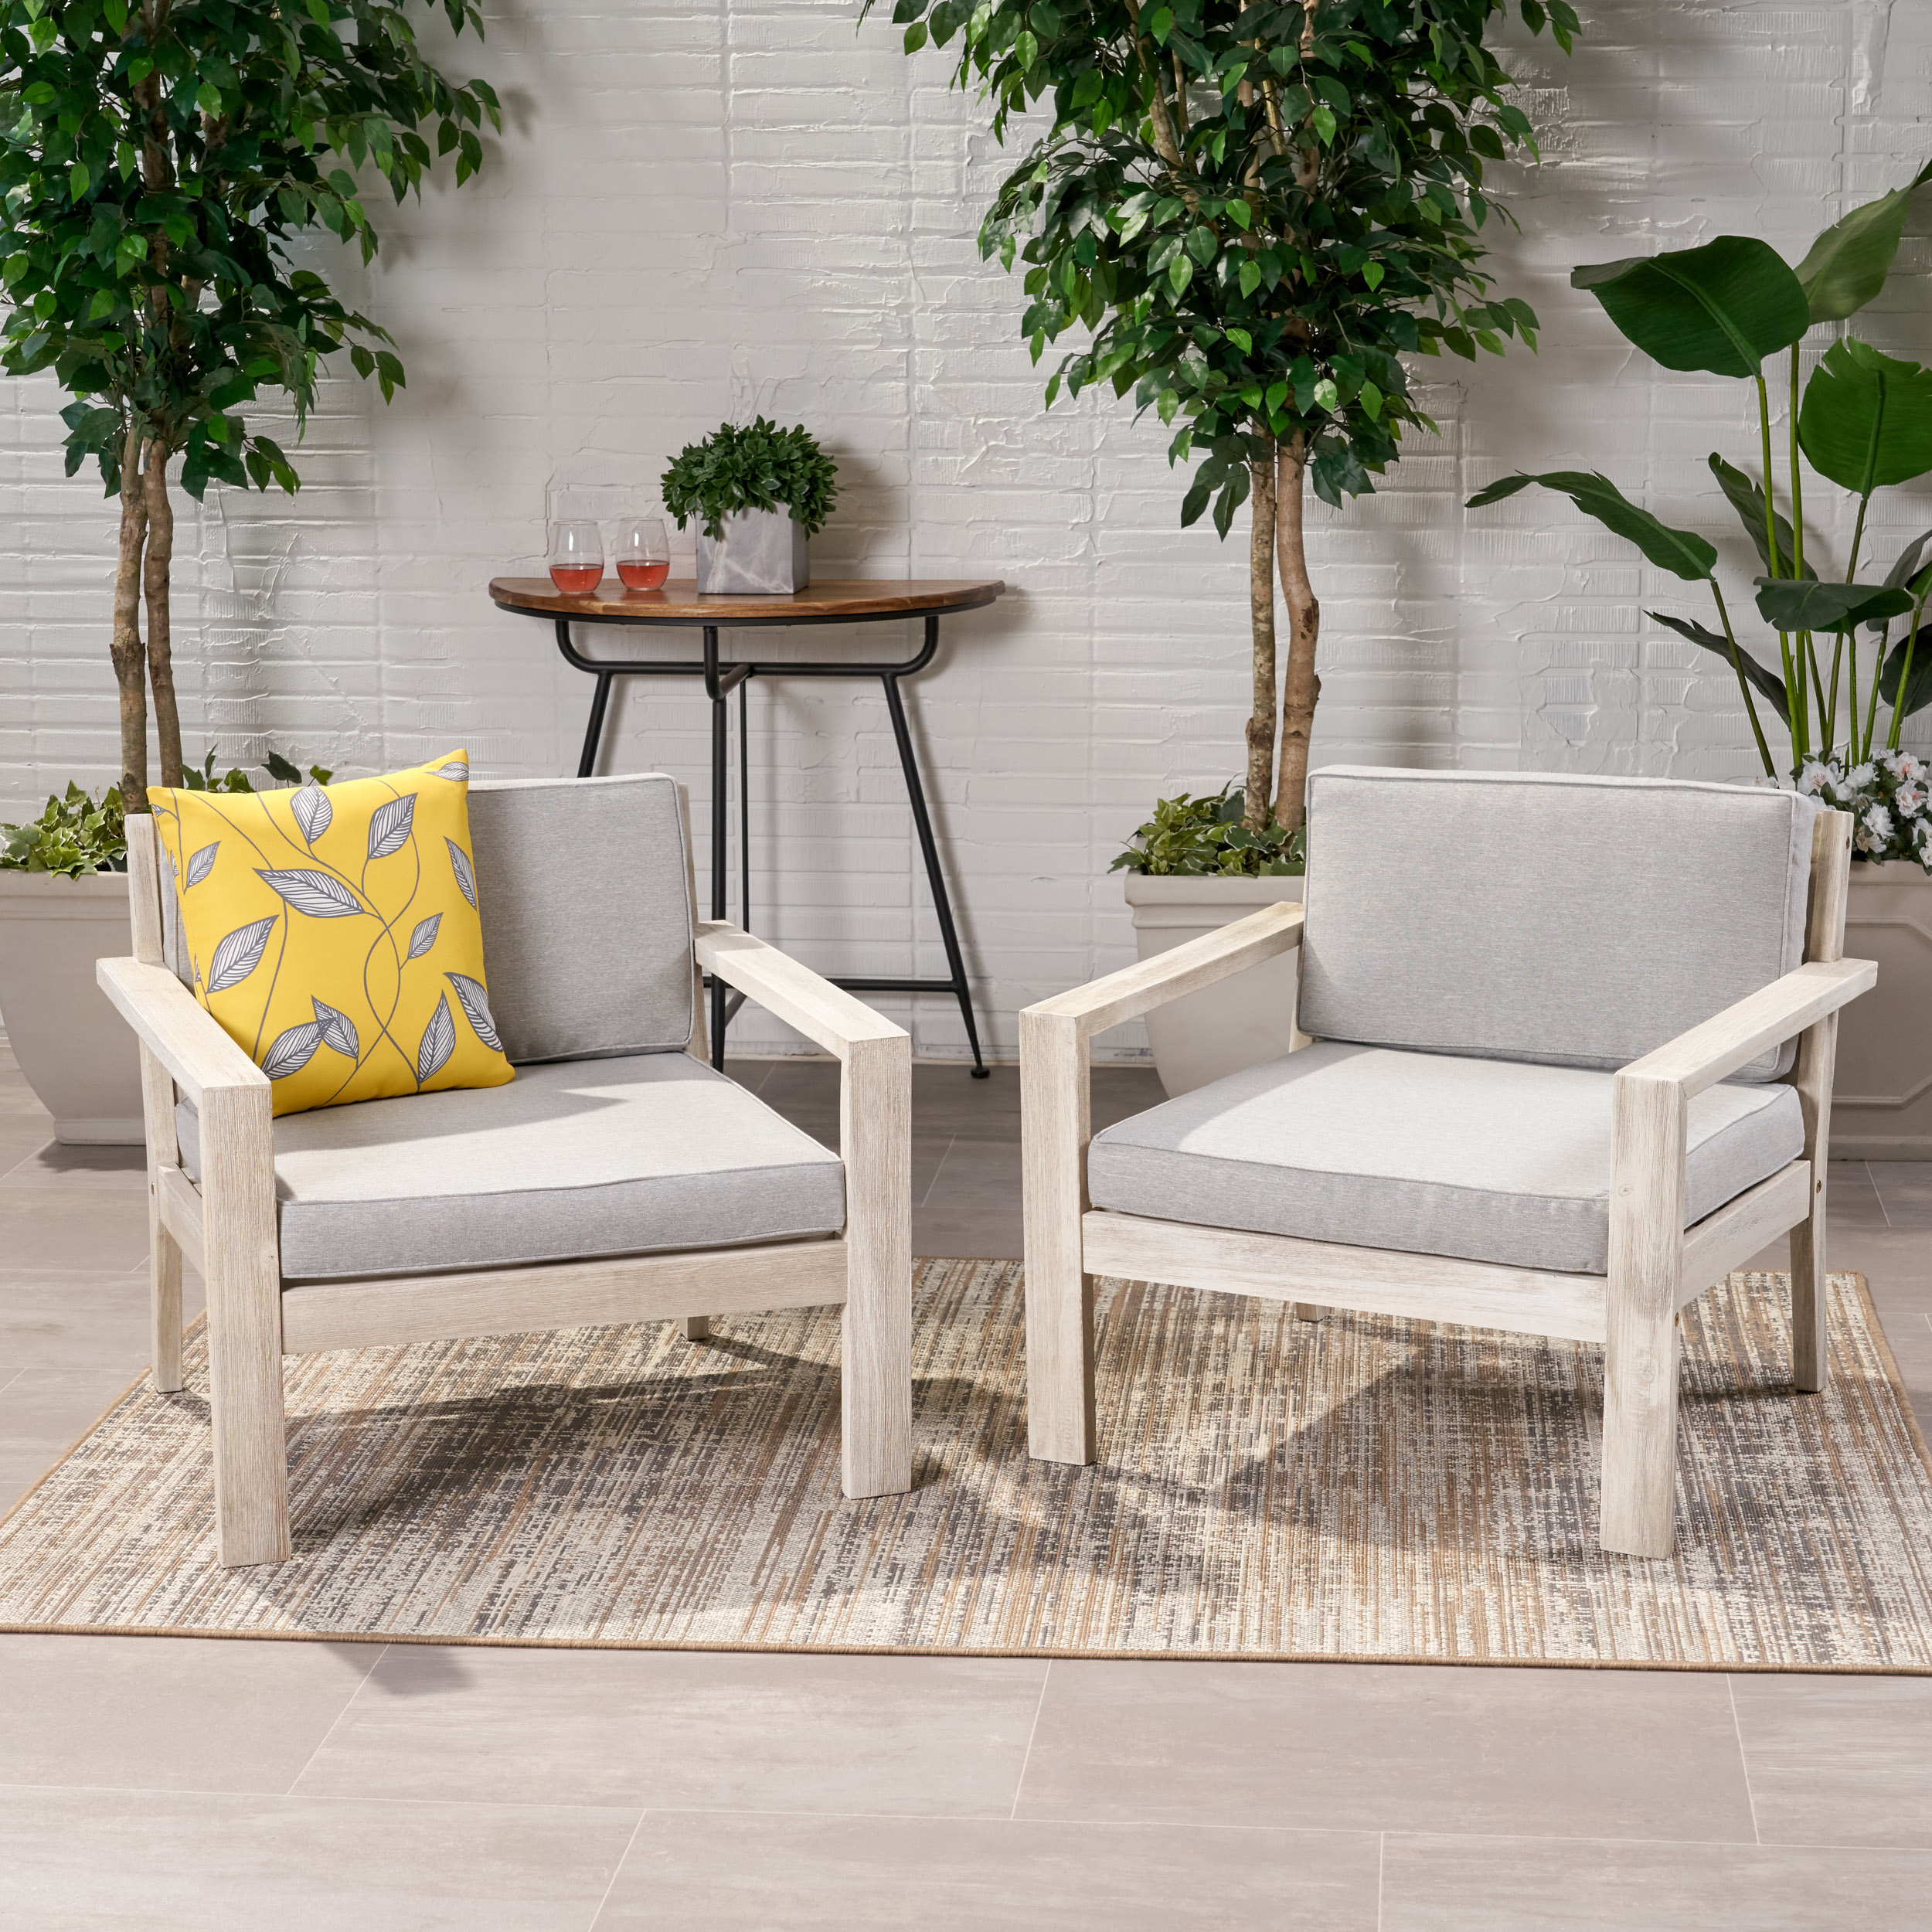 Beryl Outdoor Acacia Wood Club Chairs With Cushions (Set Of 2) - Brushed Light Gray Wash, Cream